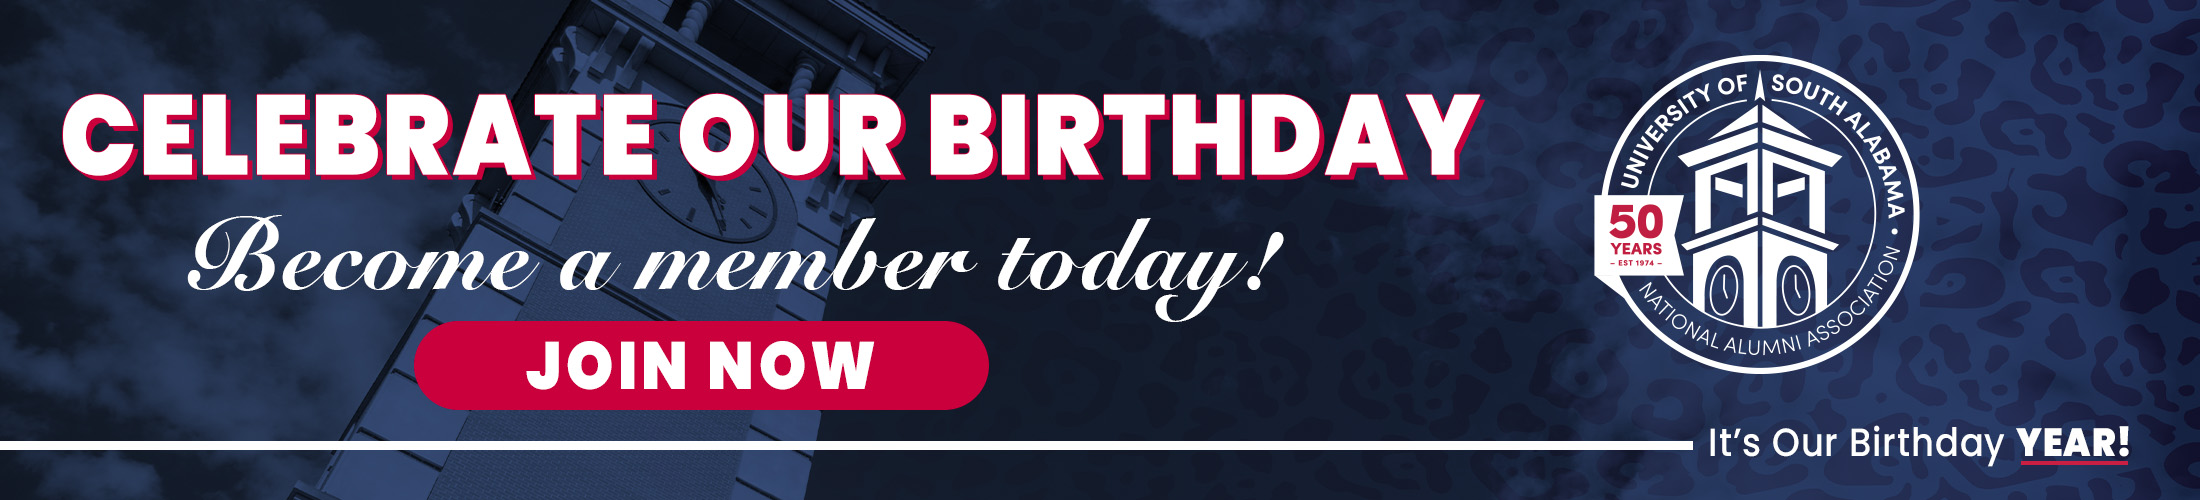 MembershipConnects - Celebrate our Birthday Become a Member today! Join Now